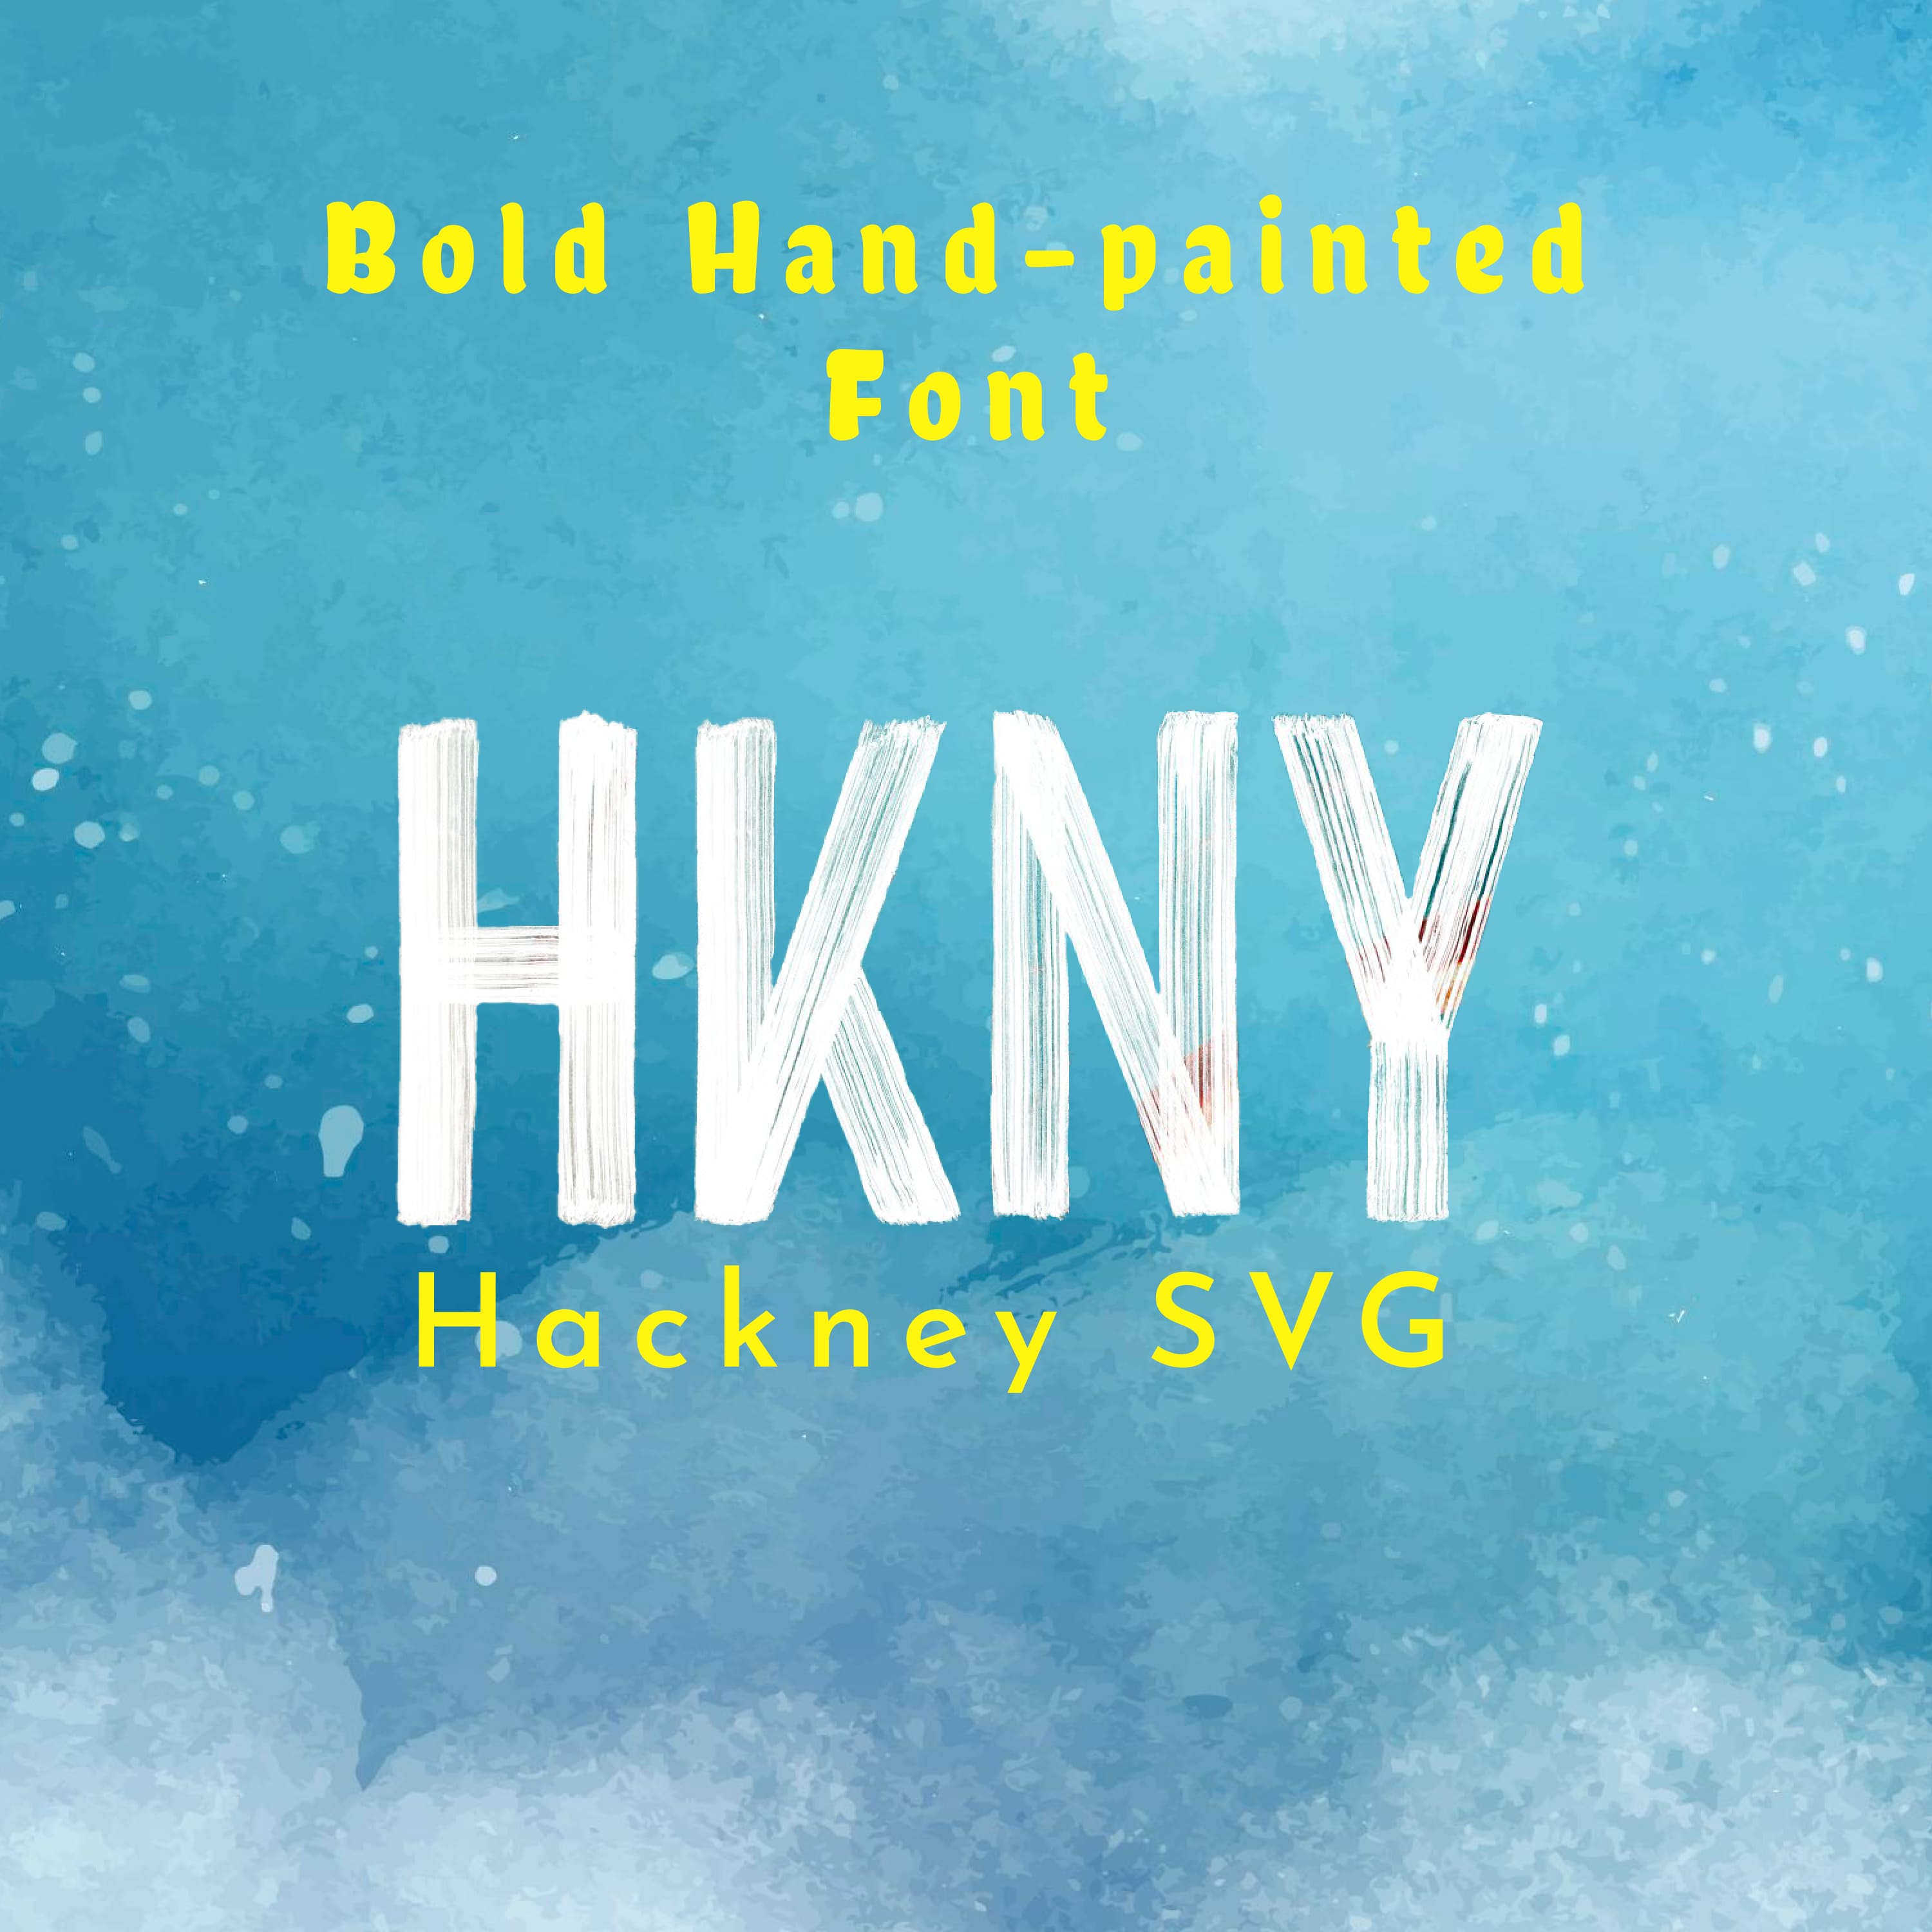 Hackney SVG Bold Hand Painted Font 1500x1500 1.